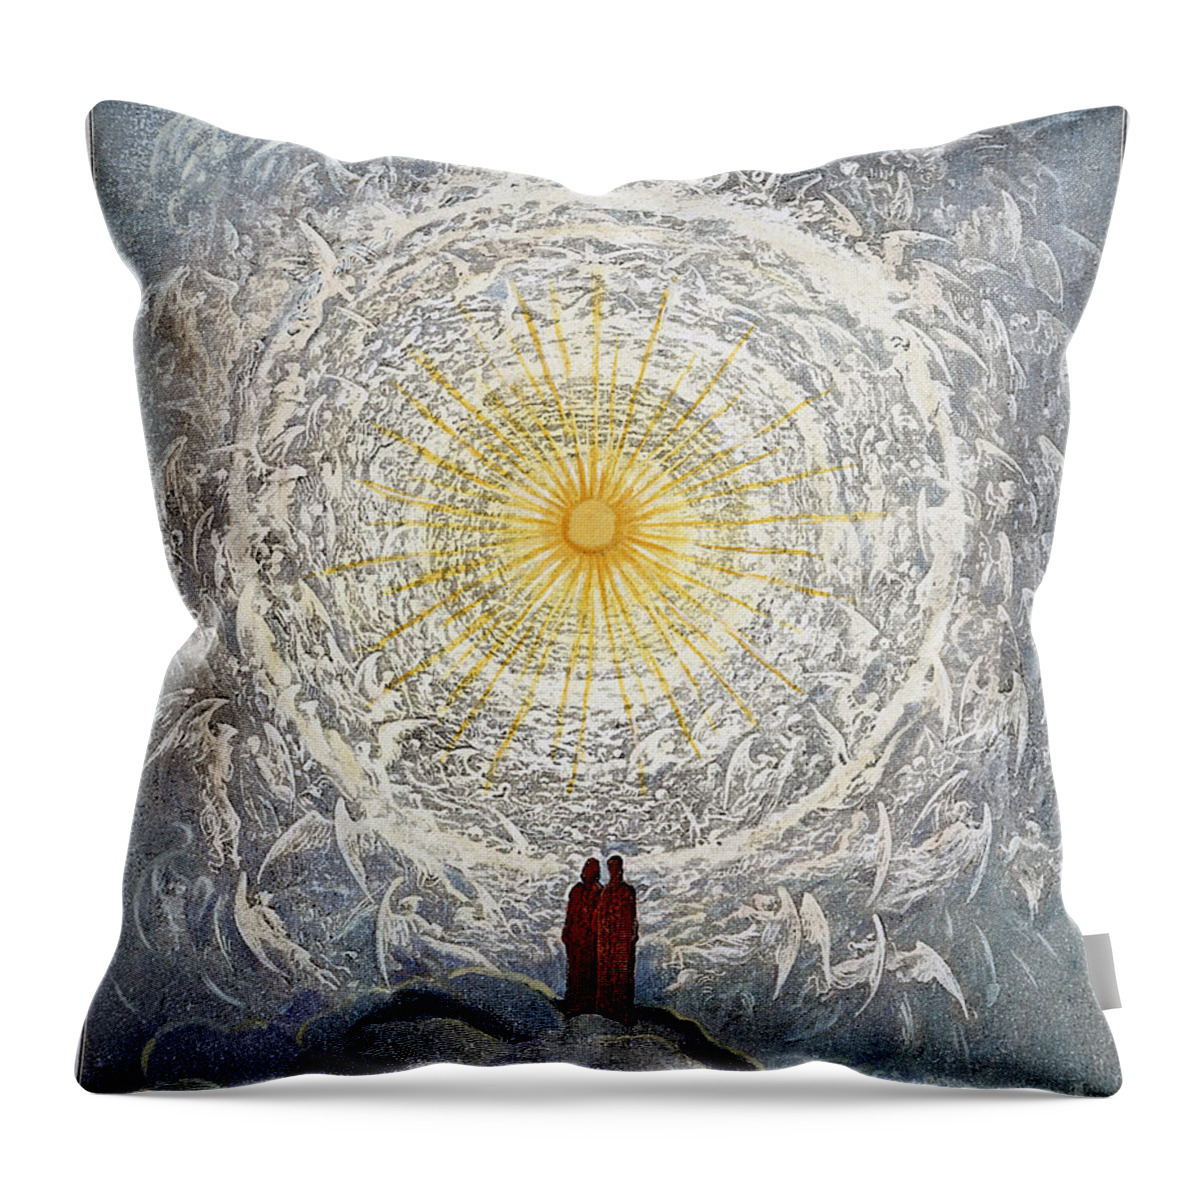 19th Century Throw Pillow featuring the drawing Paradiso by Gustave Dore